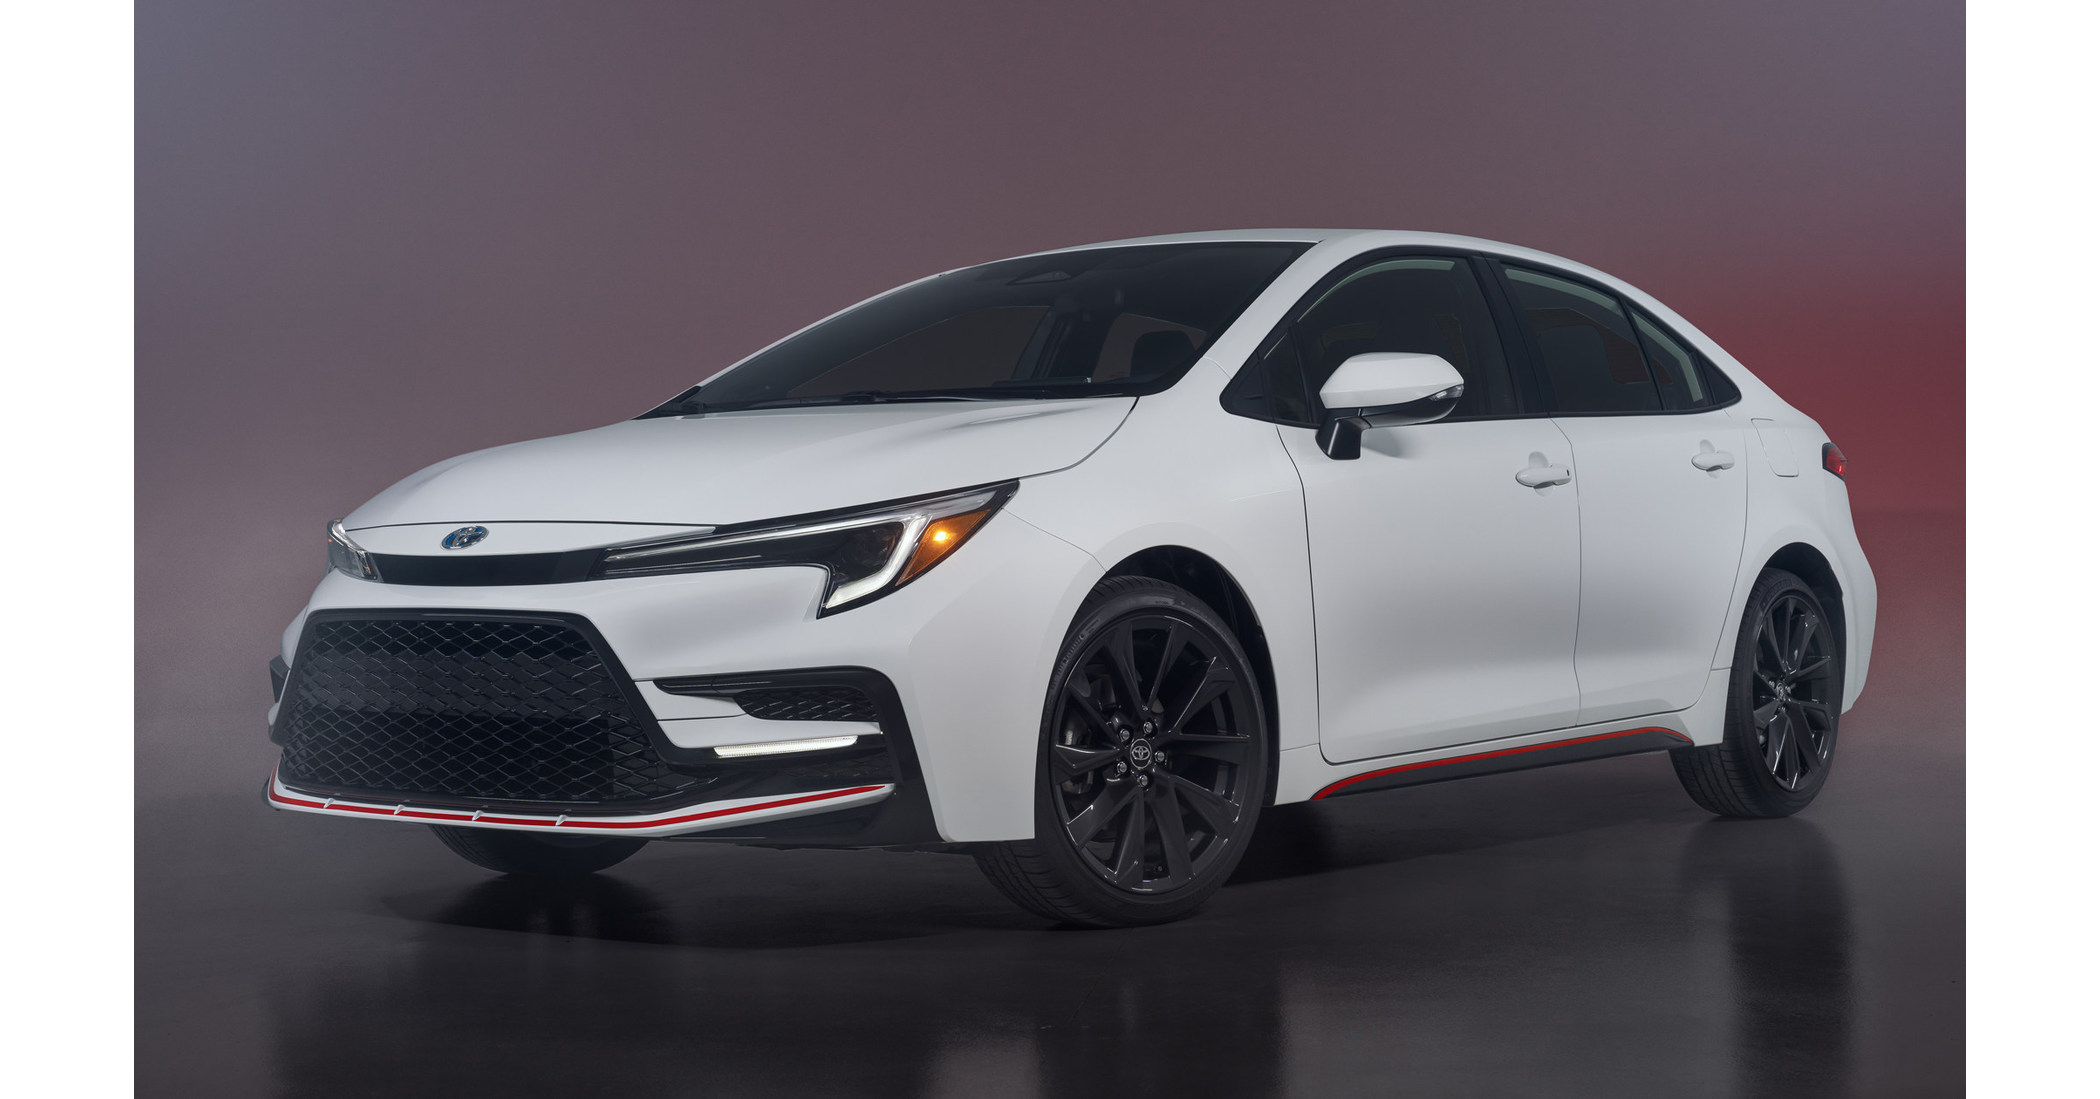 2023 Toyota Corolla Launched In Japan With Bigger Screen, Upgraded Hybrid